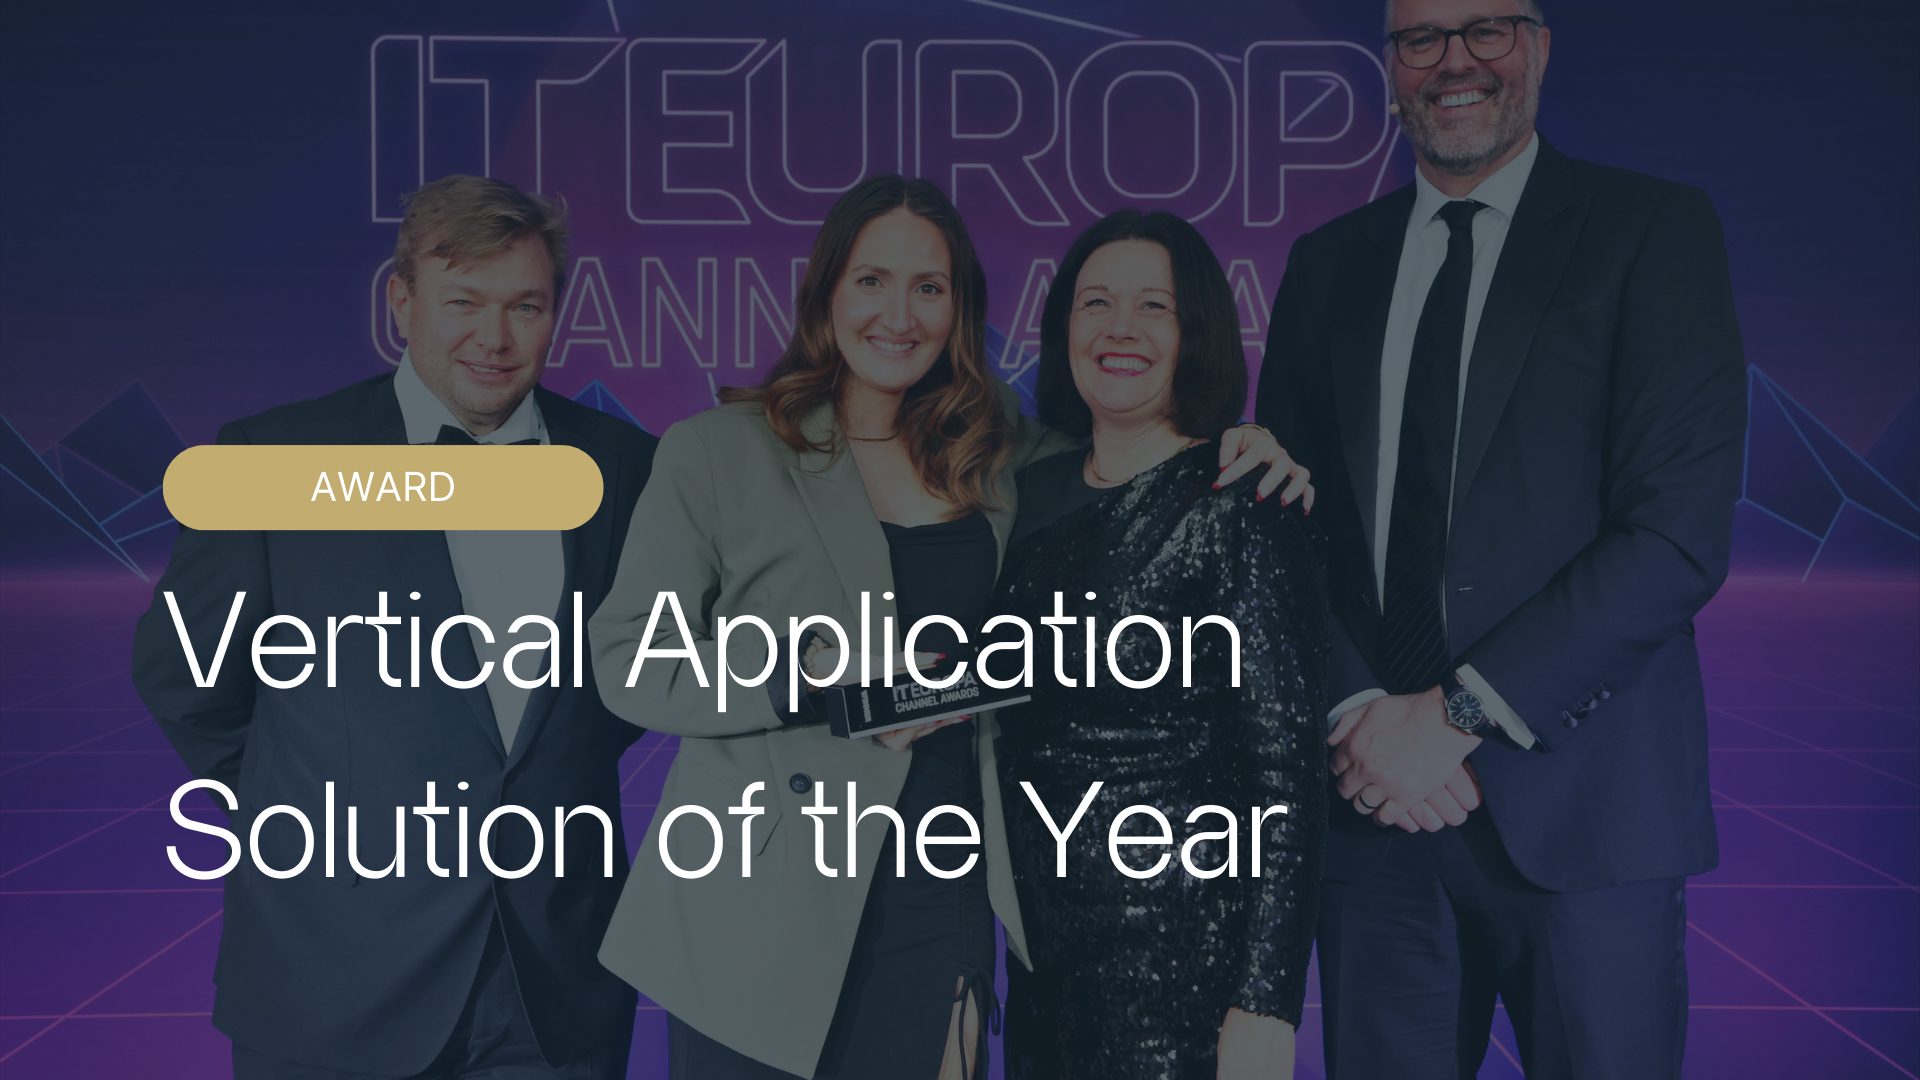 Arribatec wins Vertical Application Solution of the Year at IT Europa Channel Awards